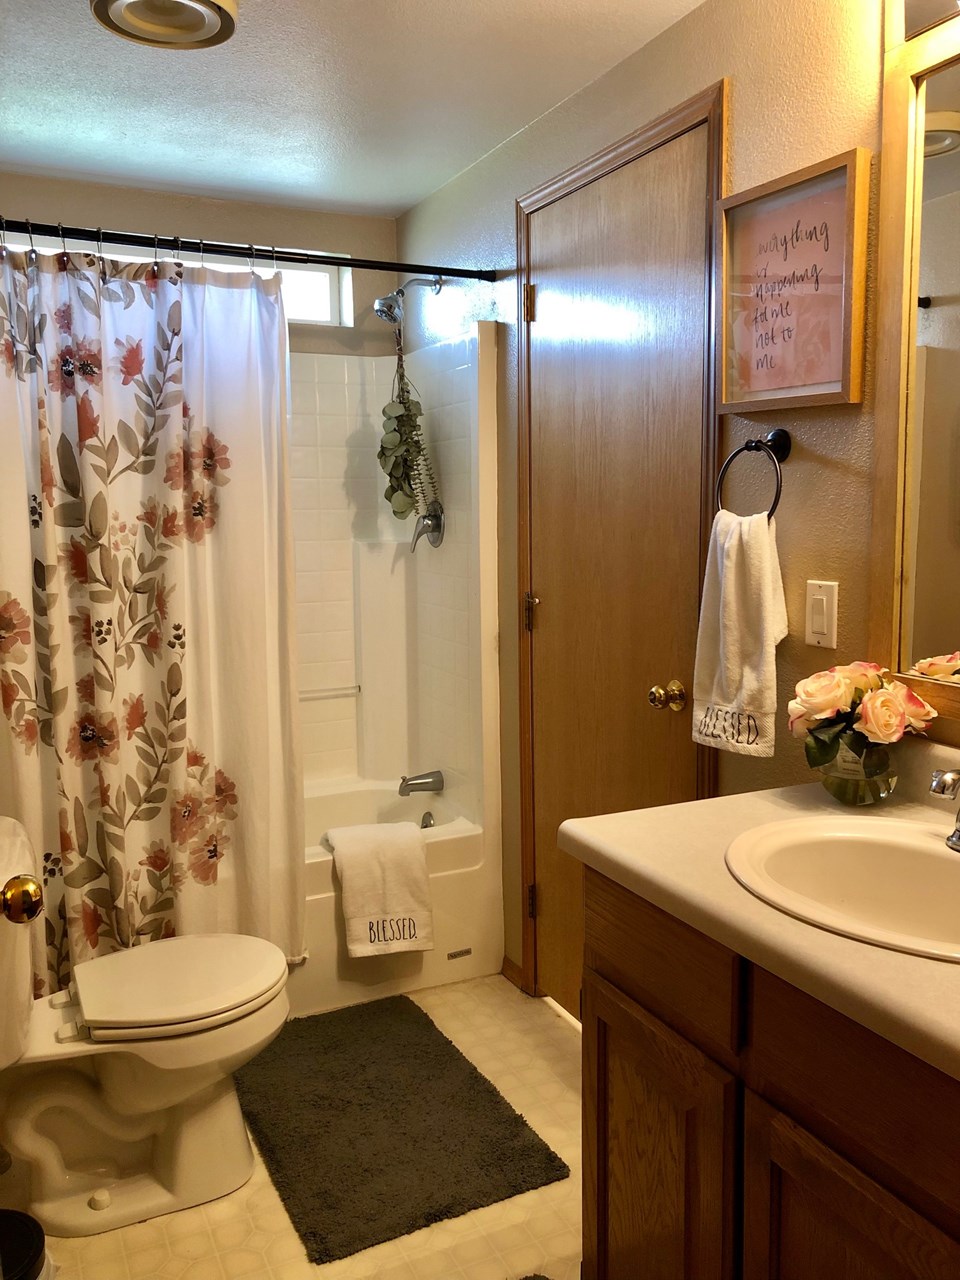 main full size bathroom with entrance from laundry room & 2nd entrance from hallway